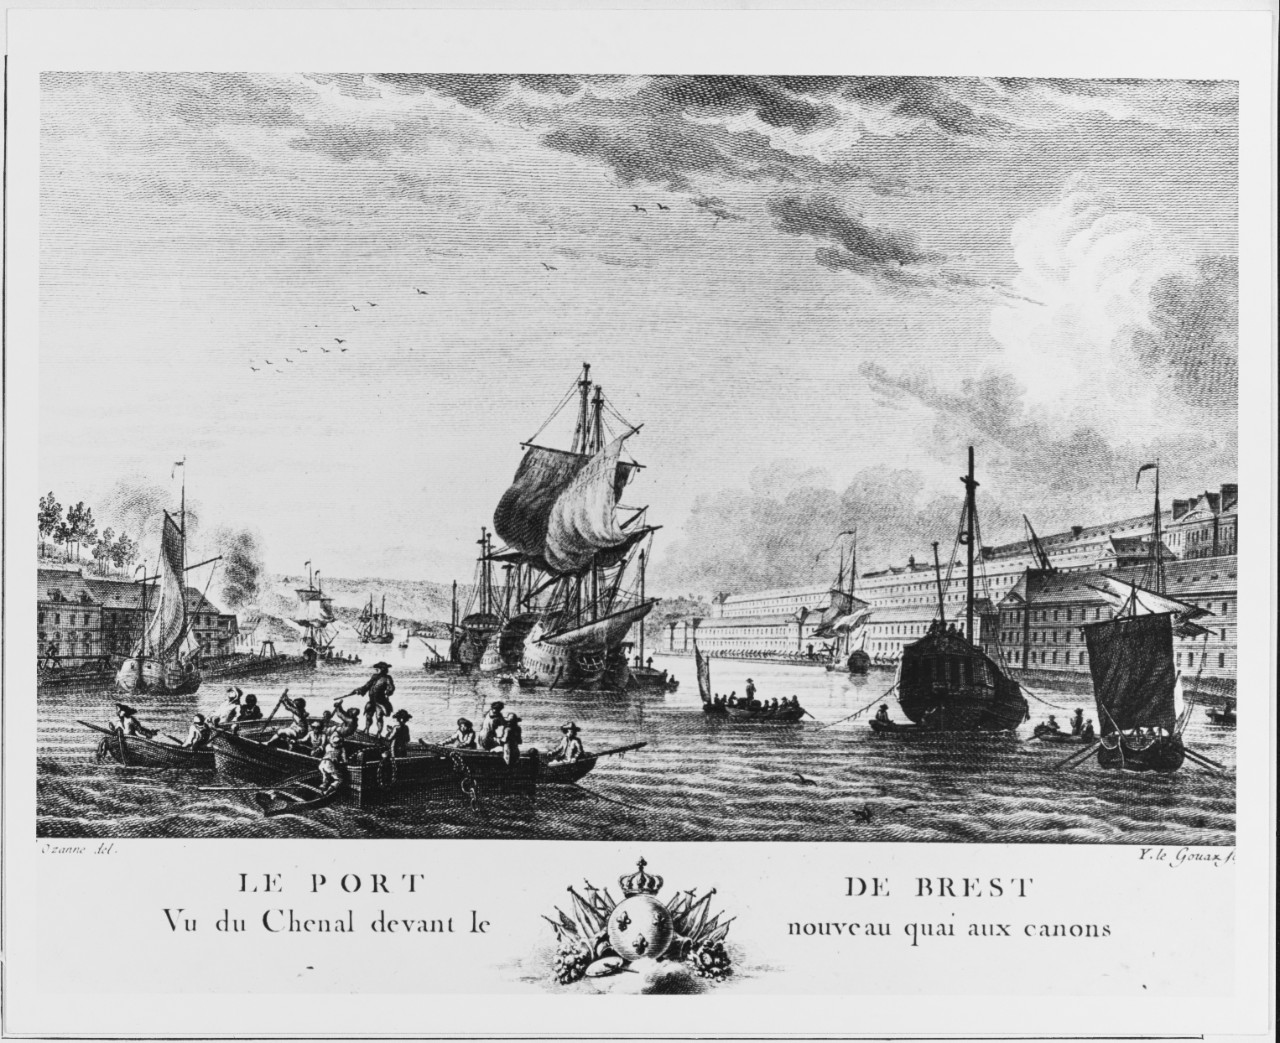 Port of Brest at the time of the American Revolution.